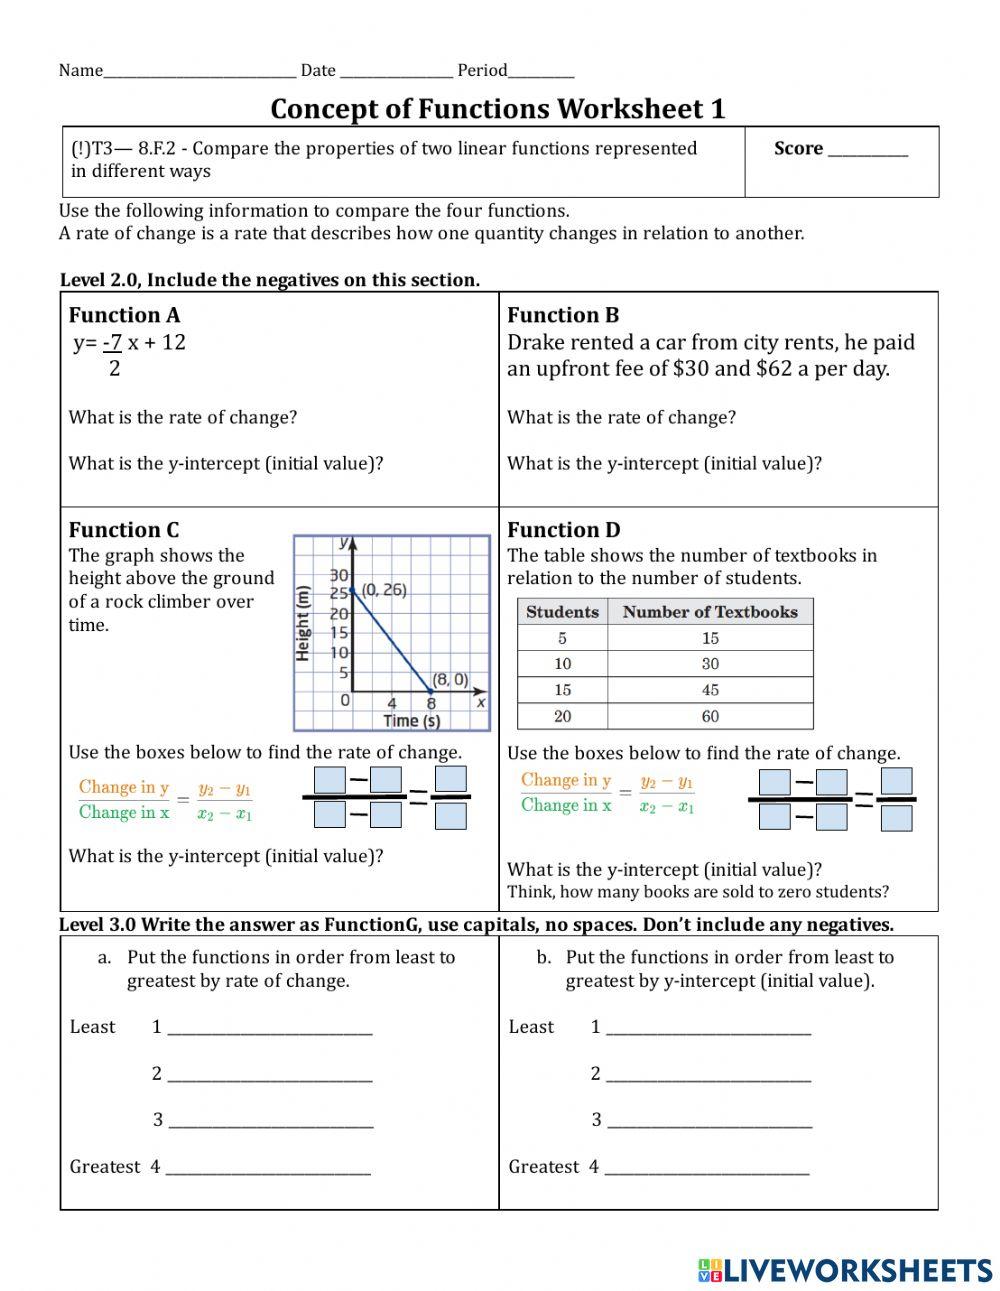 Concept of Functions Worksheet 1